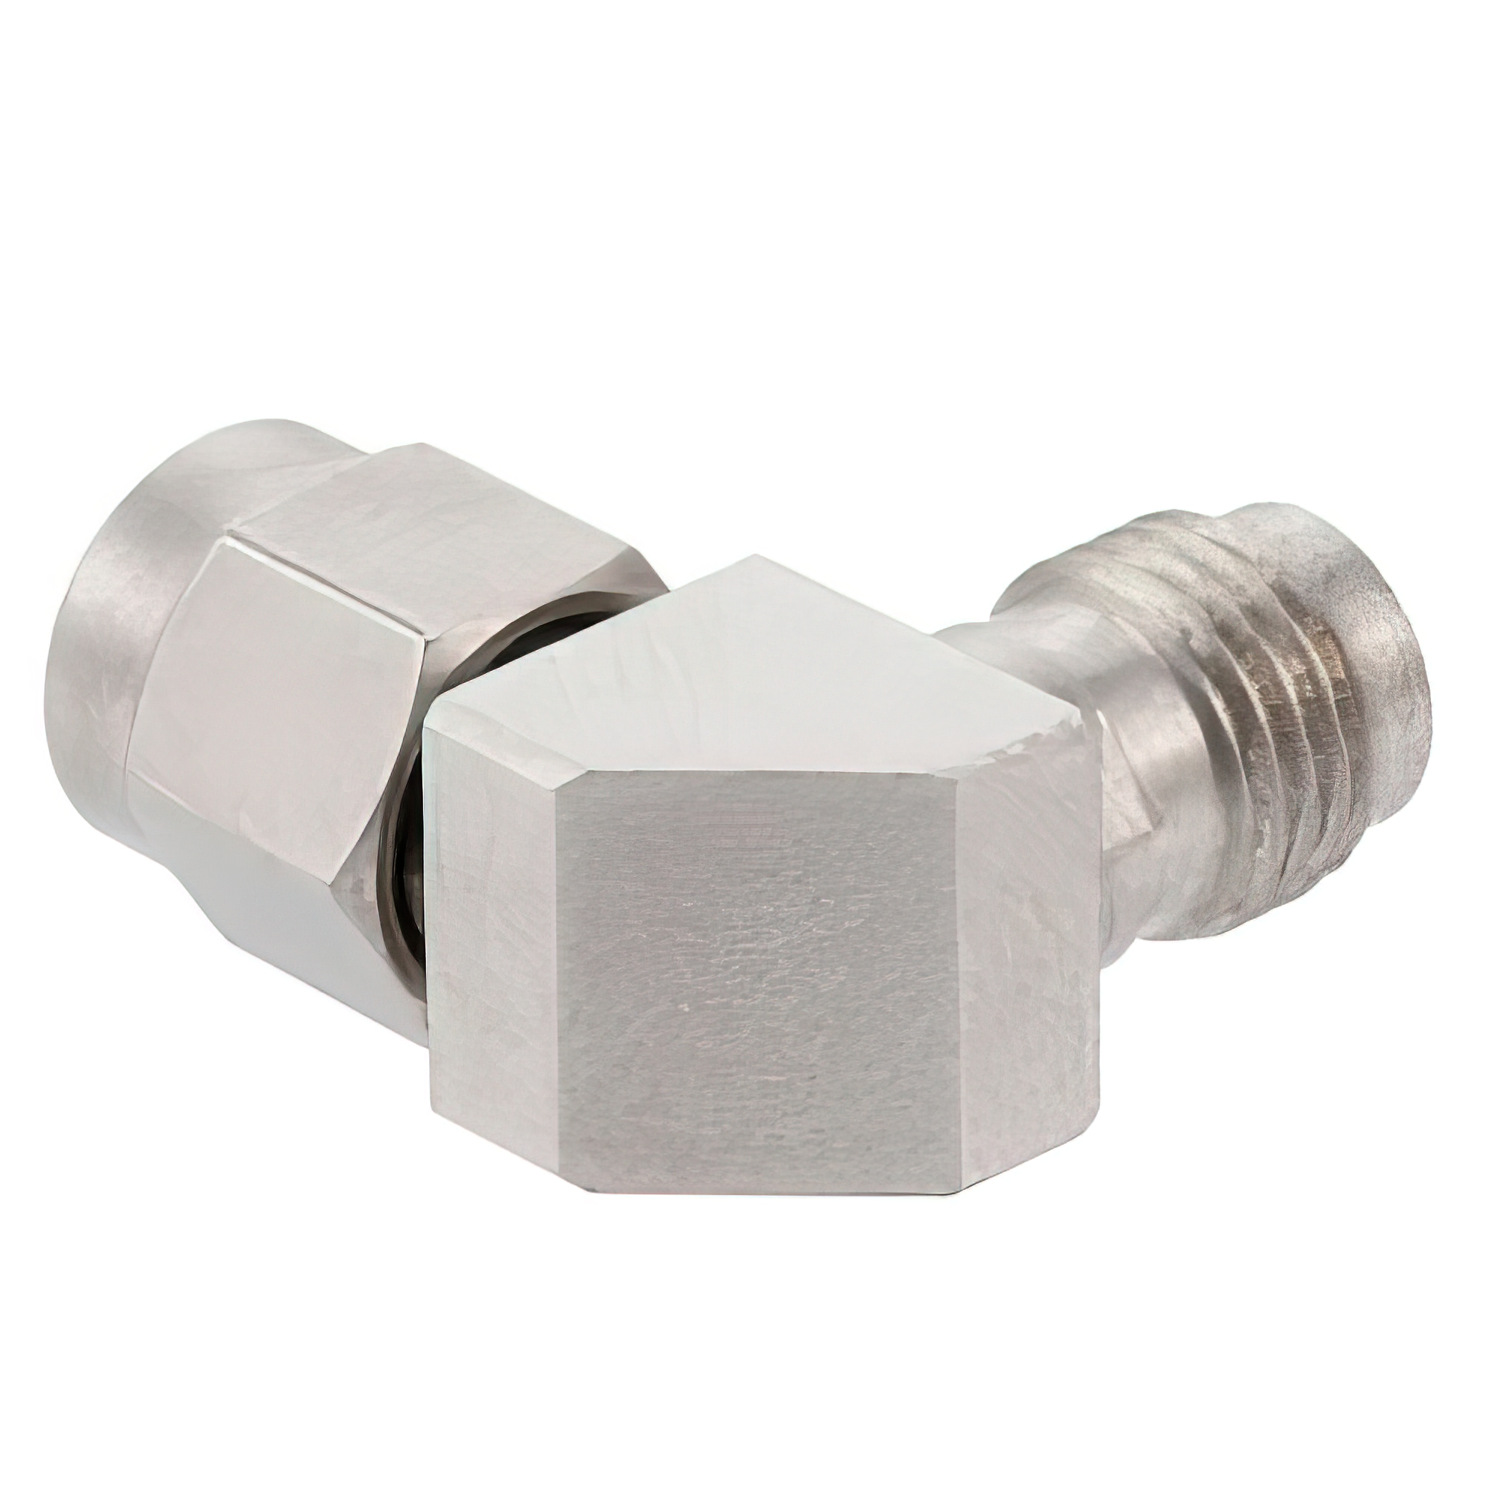 2.4mm Female to 2.92mm Male Miter Right Angle Adapter2